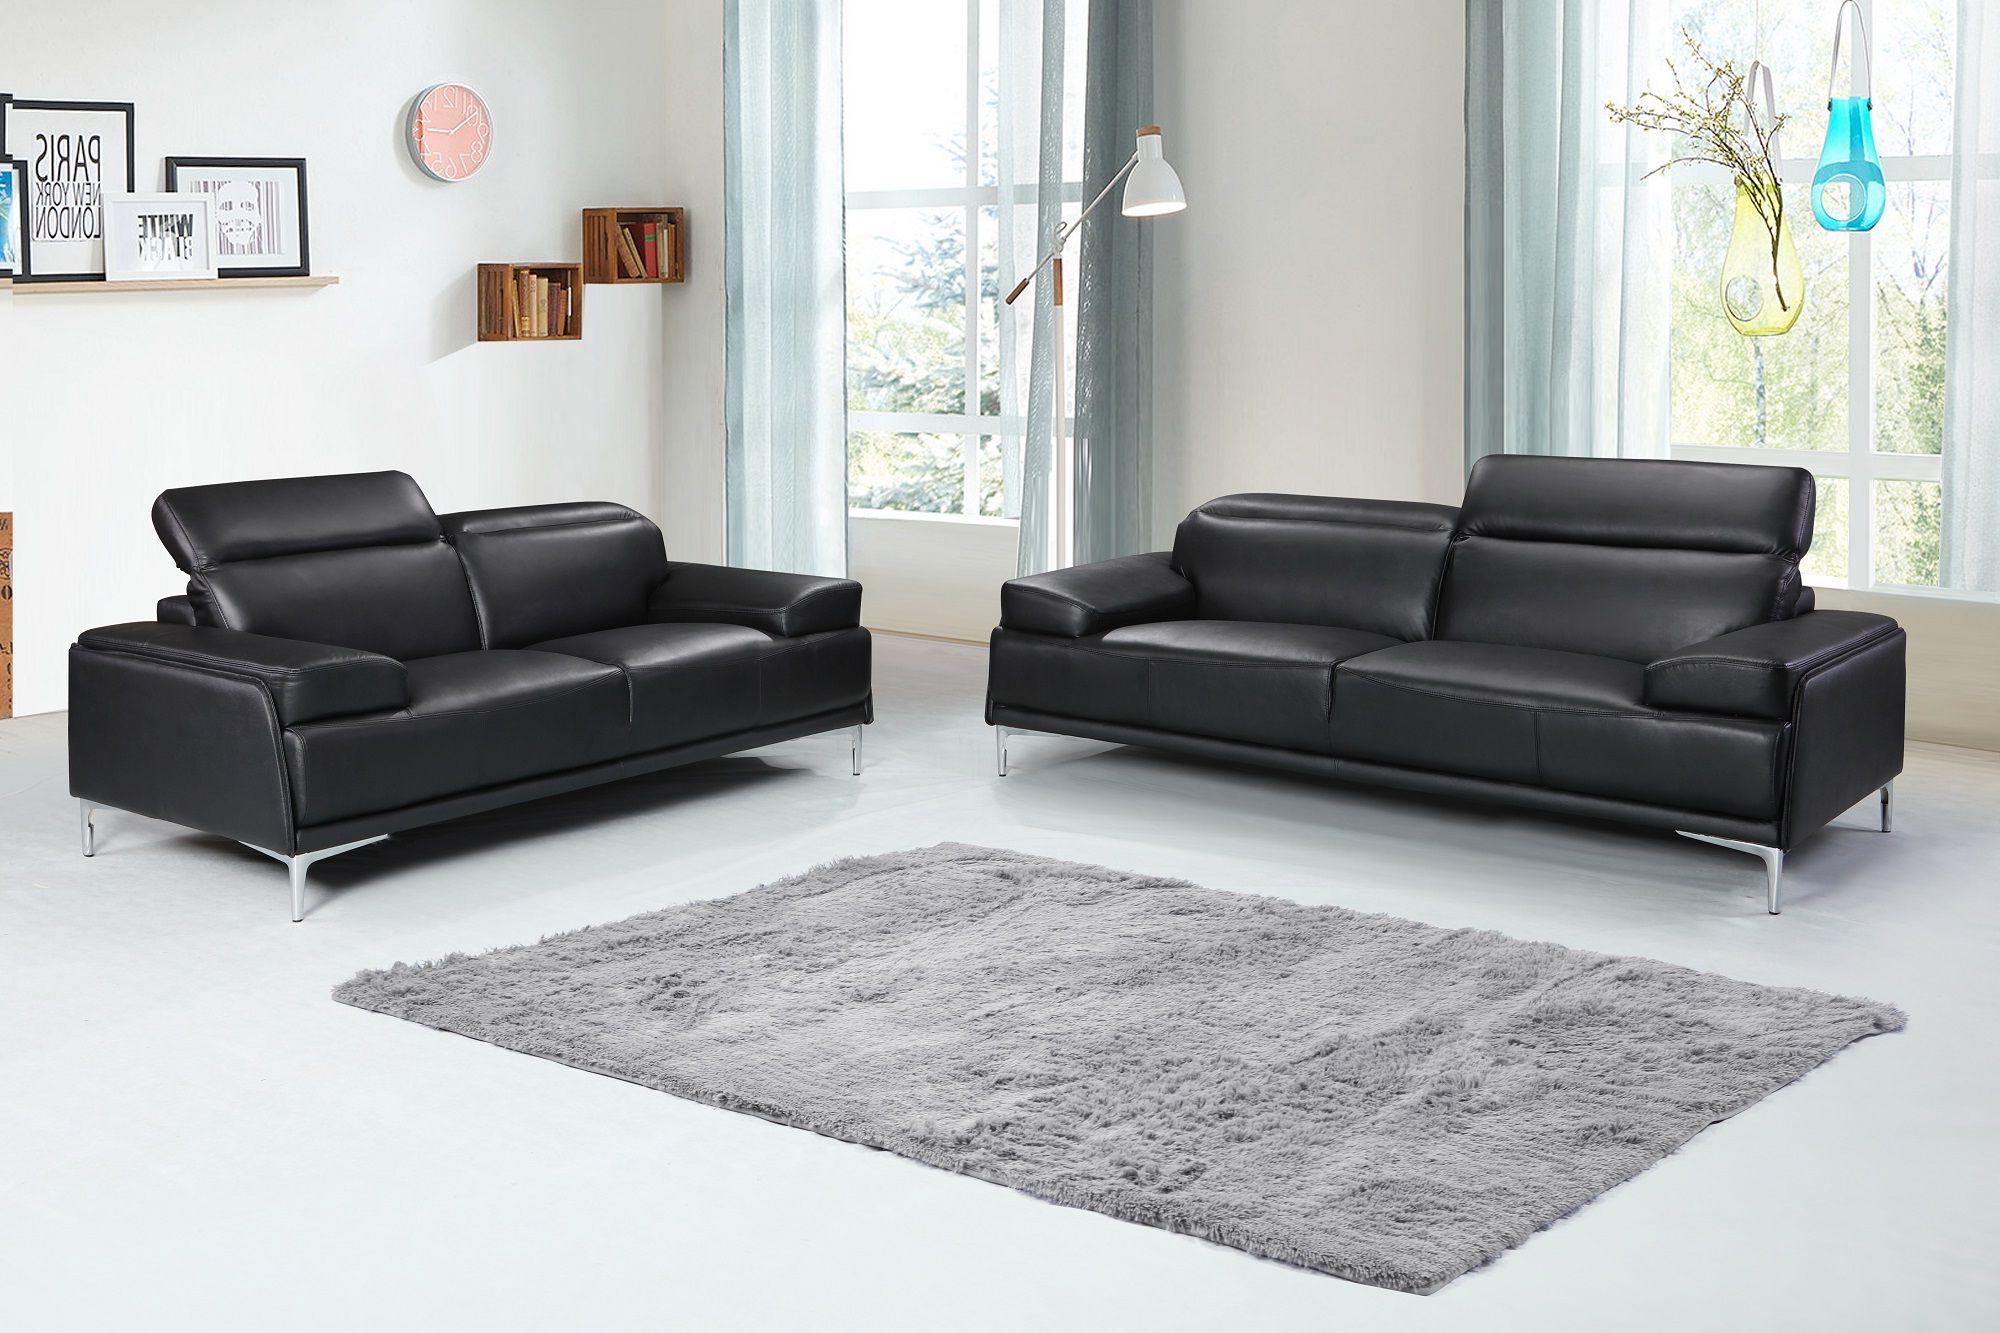 Contemporary Black Leather Living Room Sofa Set Minneapolis Minnesota J For Favorite Sofas In Black (View 8 of 15)